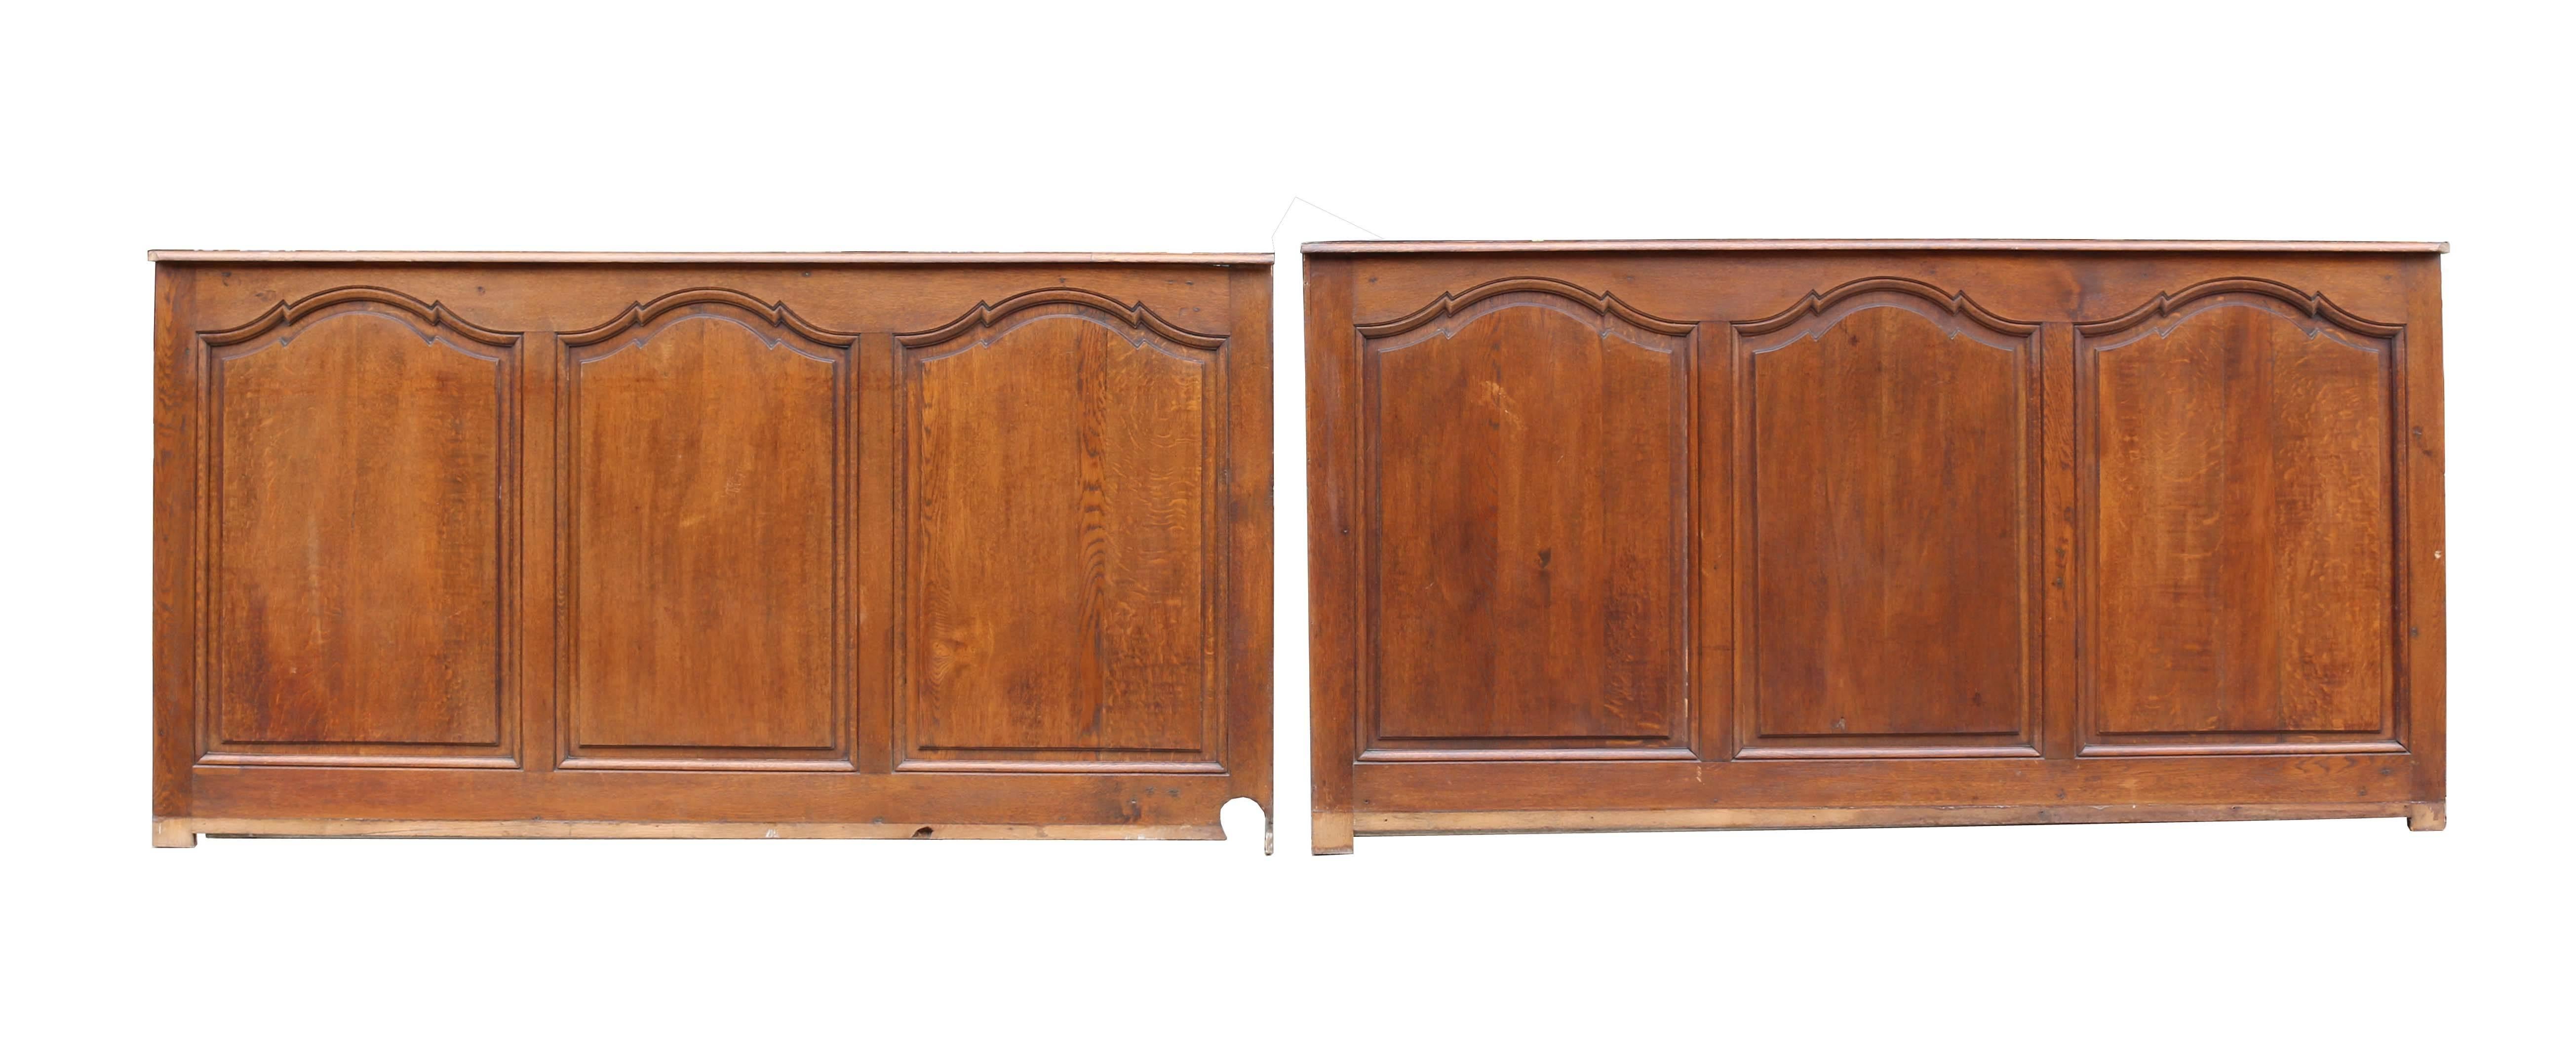 A mix of two ages. Height 99 cm (excludes skirting).

18th century paneling. 160, 154, 70, 50, 140, 130, 130, 111 cm (945cm).

1920s paneling made to the same design. 194.5, 200, 109, 58, 57 49 cm (667cm). Measures: 52 feet.